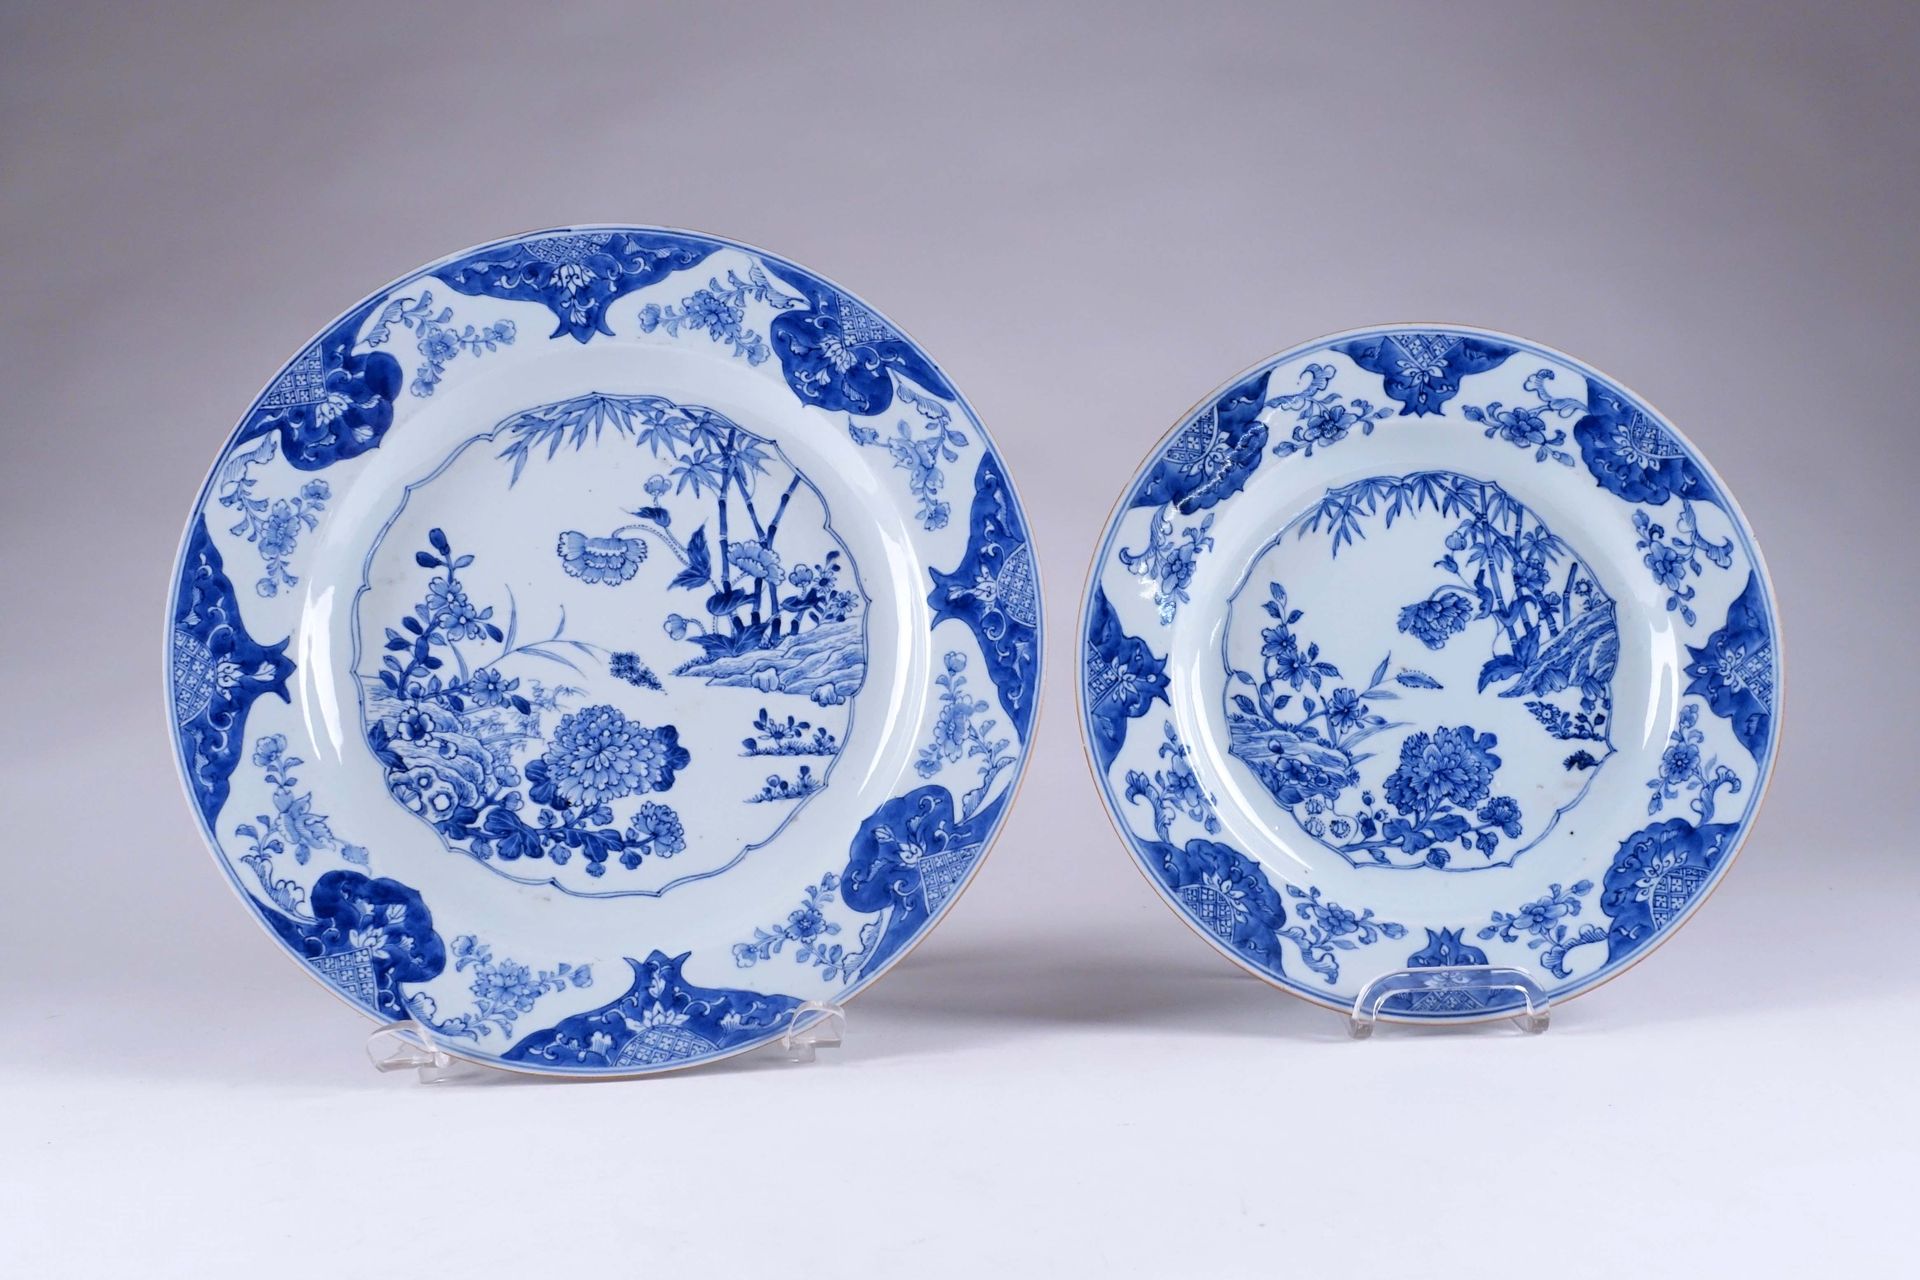 Chine. Compagnie des Indes du XVIIIe siècle. Two round porcelain dishes with whi&hellip;